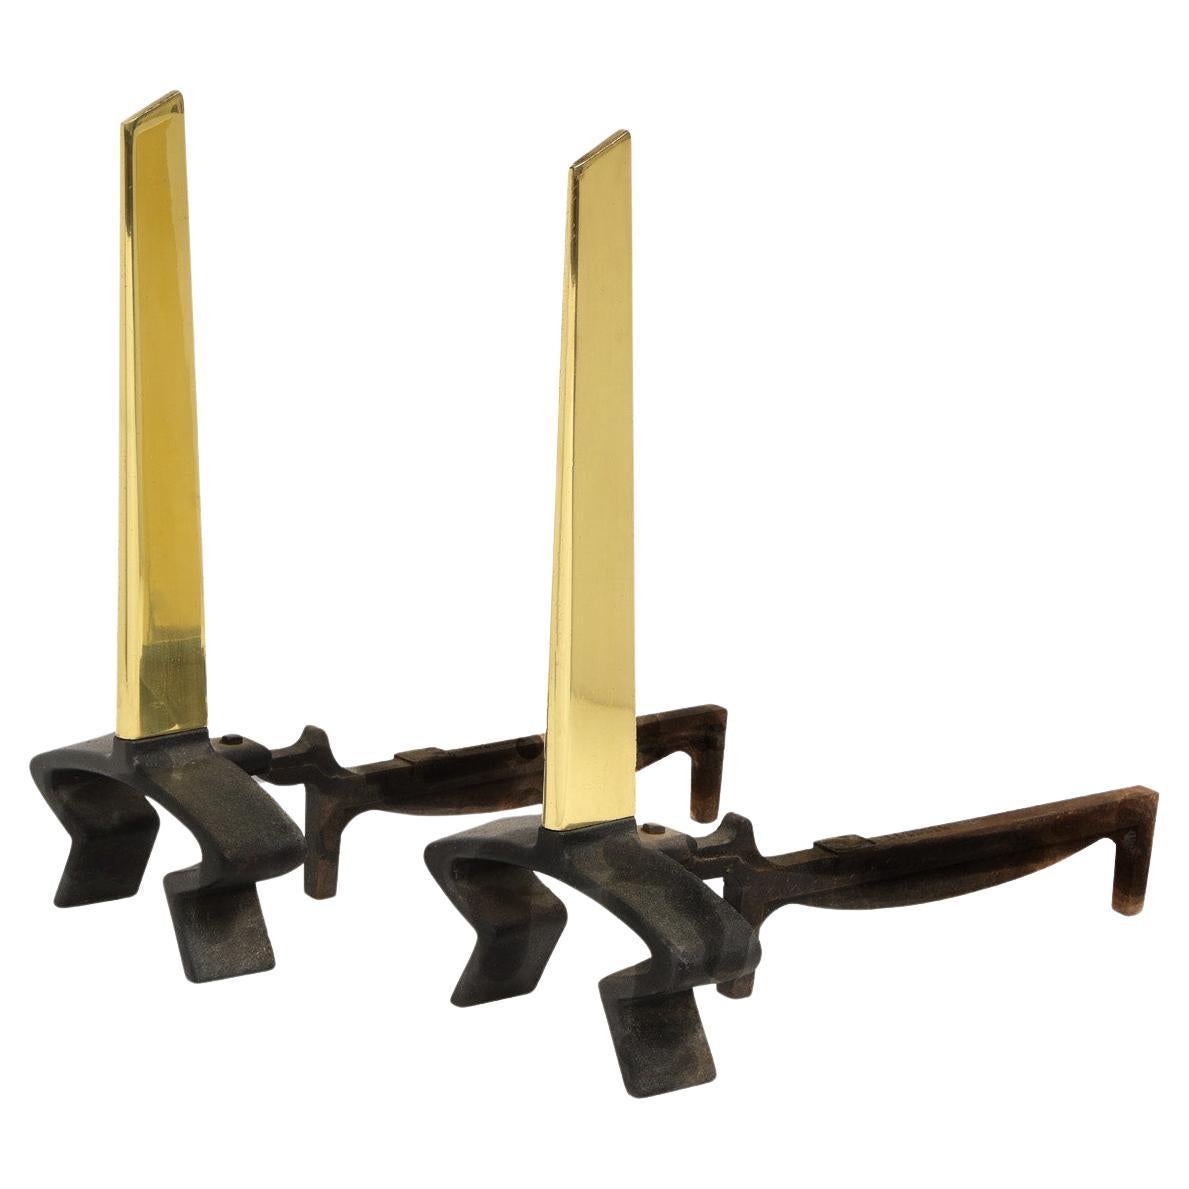 Donald Deskey Pair of Andirons in Wrought Iron and Brass 1950s (Signed)